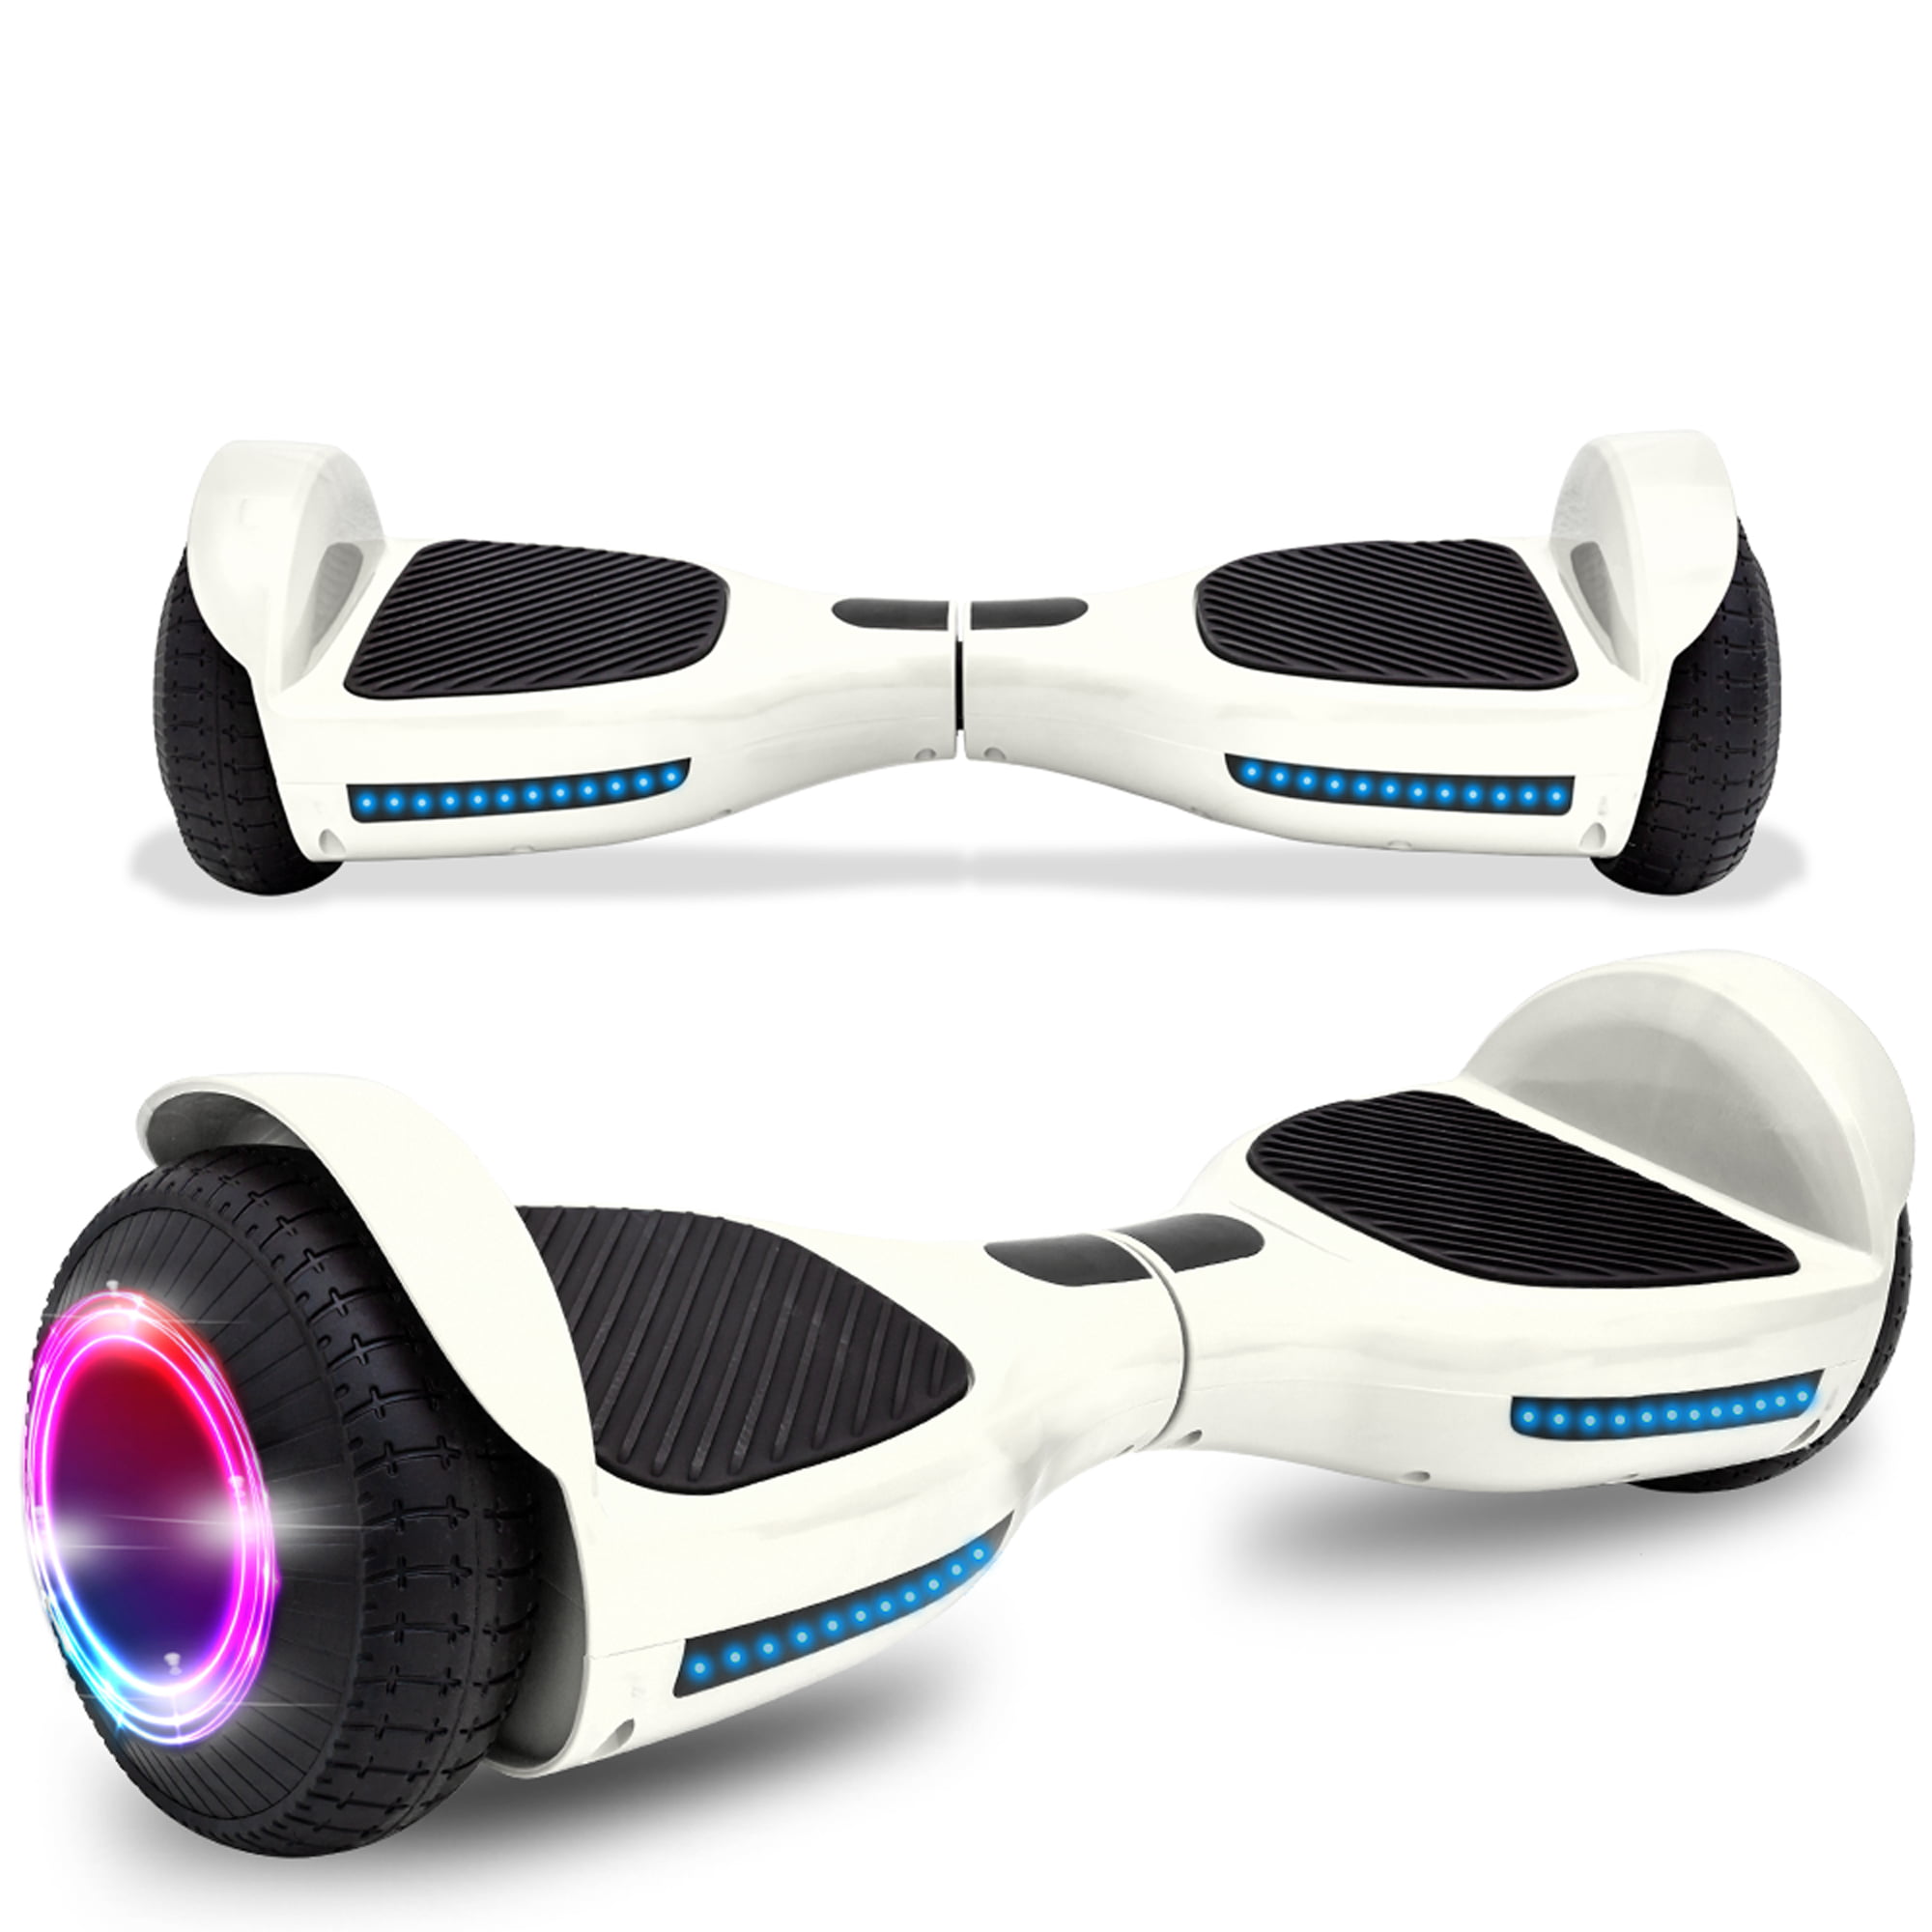 UL2272 Certified Keepower Chrome Hoverboard 6.5 Self Balancing Hoverboard for Kids with Built-in Bluetooth Speaker 